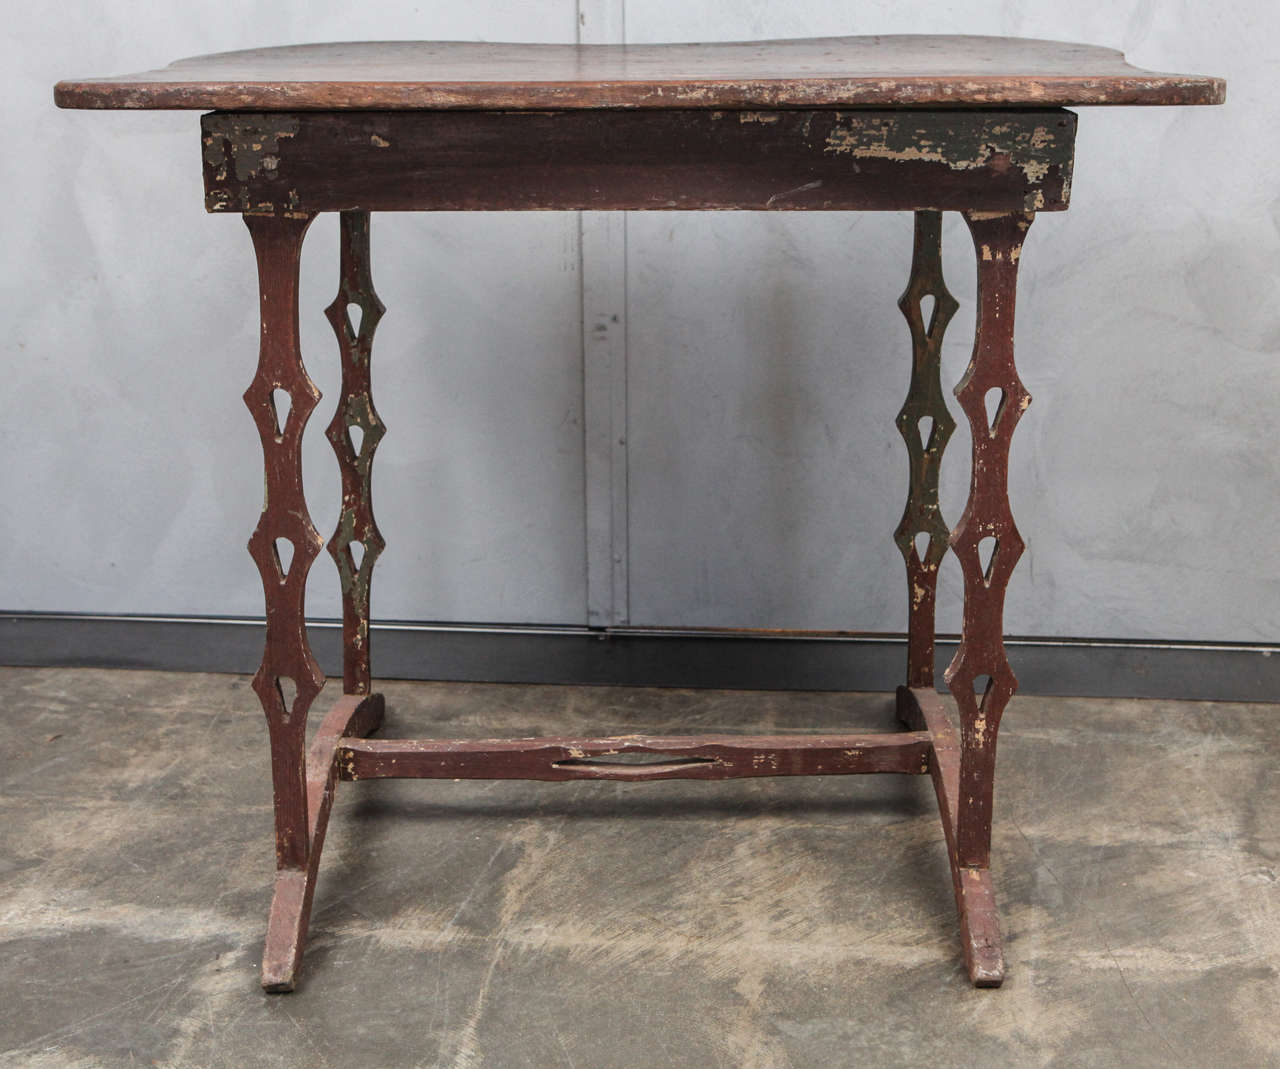 This wonderful little table shows influences of Scandinavian design motifs with the wonderful cut-out in the legs and stretcher. The is also a nod to European design movements with the interestingly shaped curved feet. The table has a nicely shaped